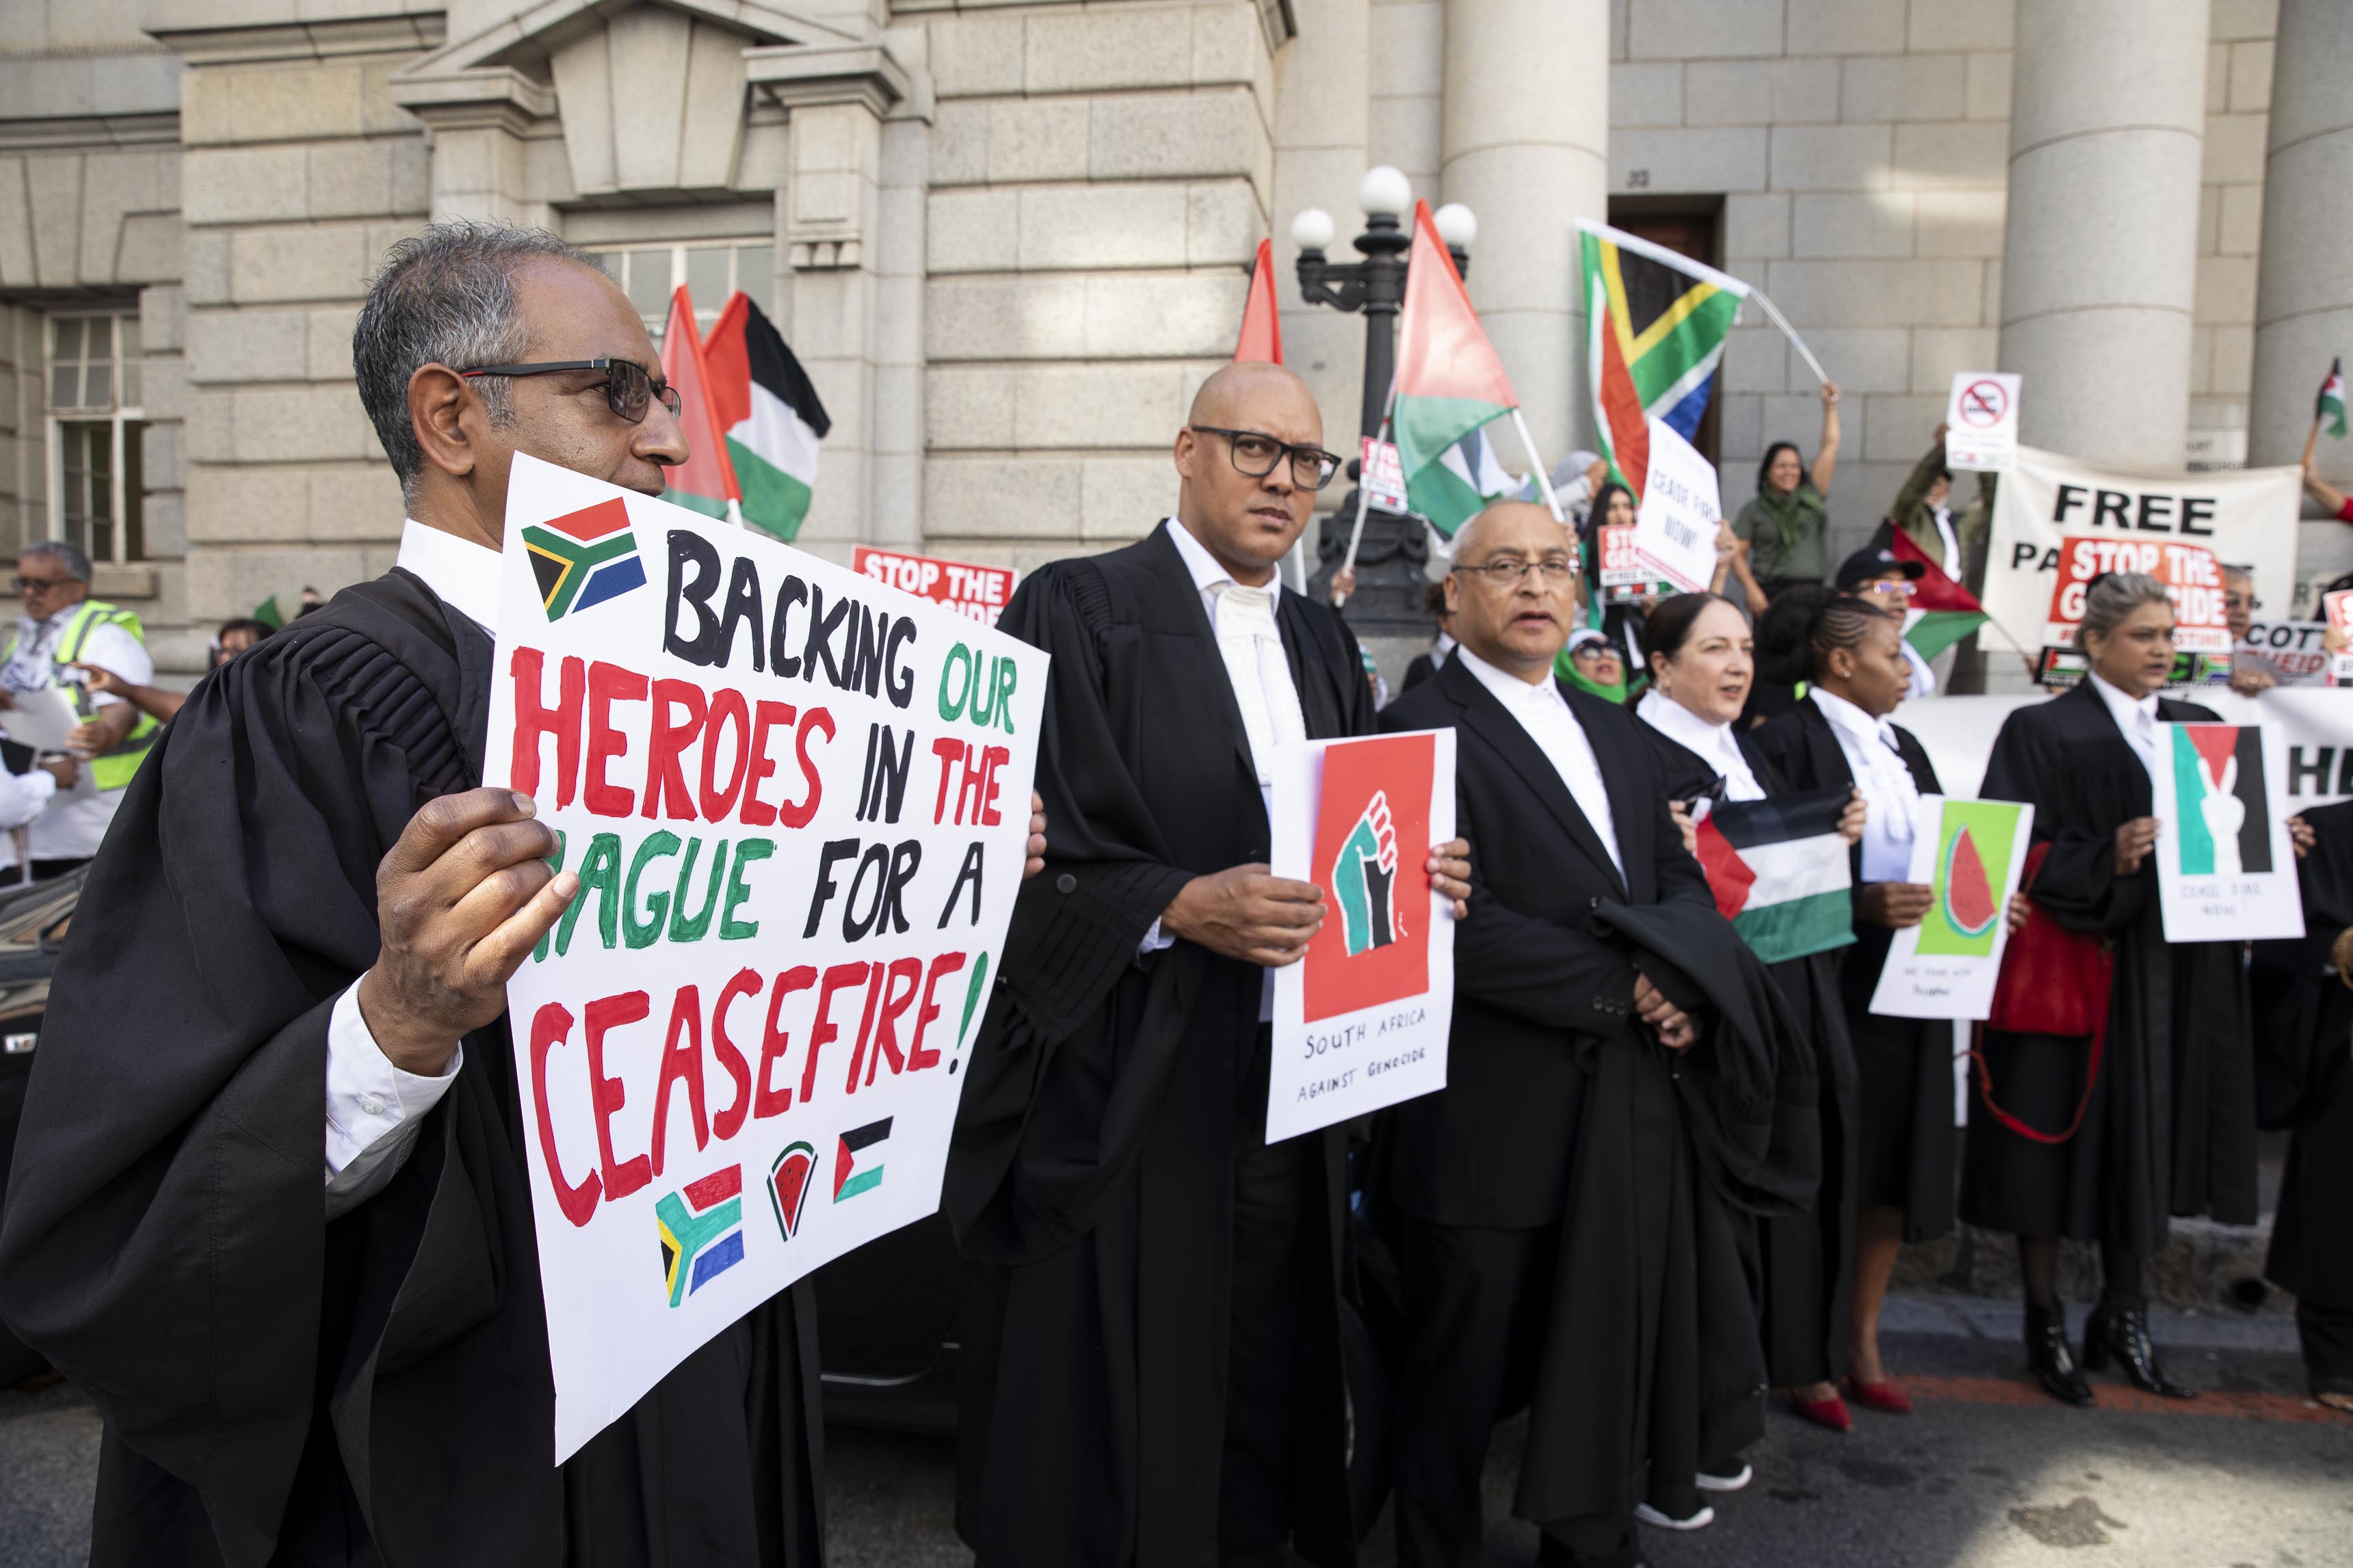 rallies in photos – sa govt’s genocide case hailed for being a ‘madiba moment’ while pro-israelis cry ‘antisemitism’